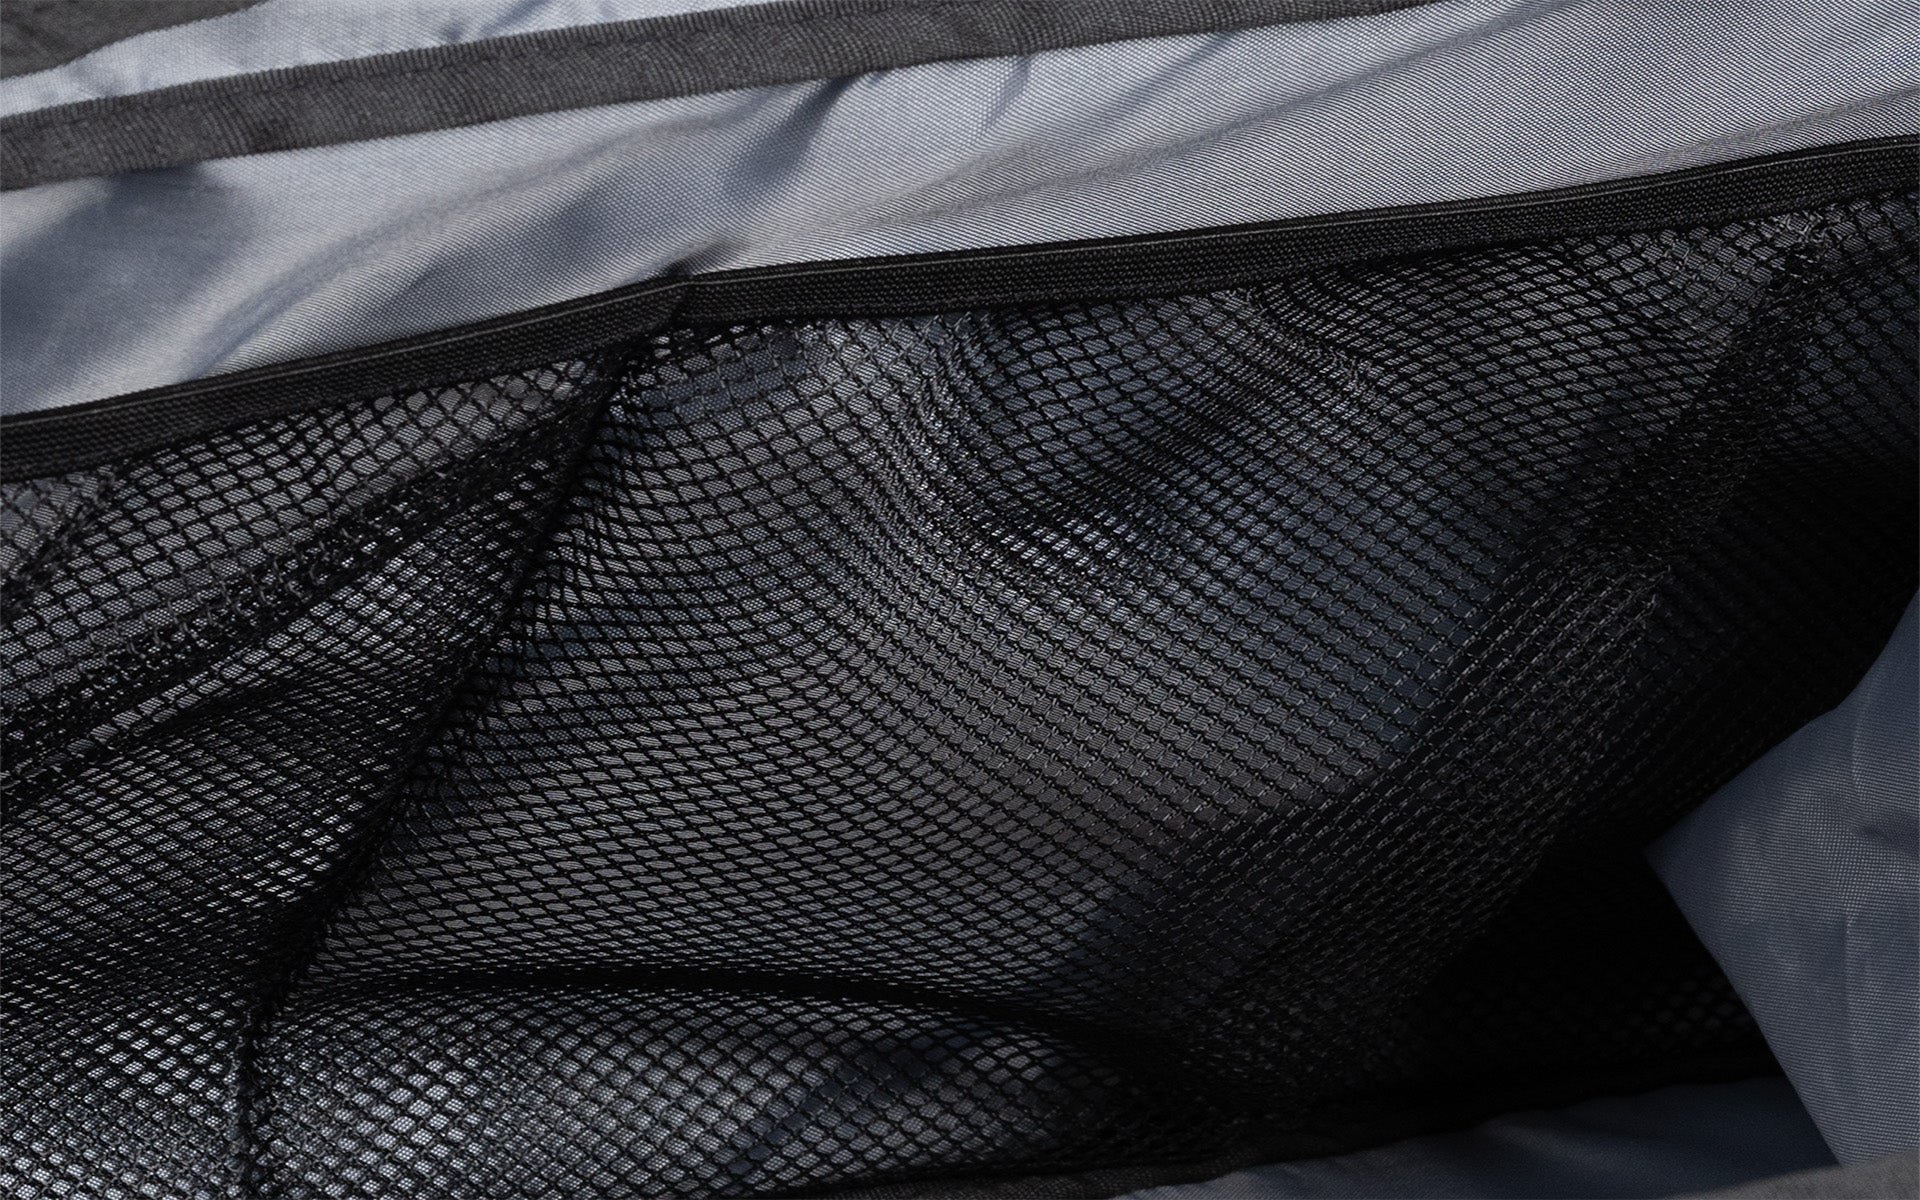 Close up of mesh pockets on the inside of the Gym Bag